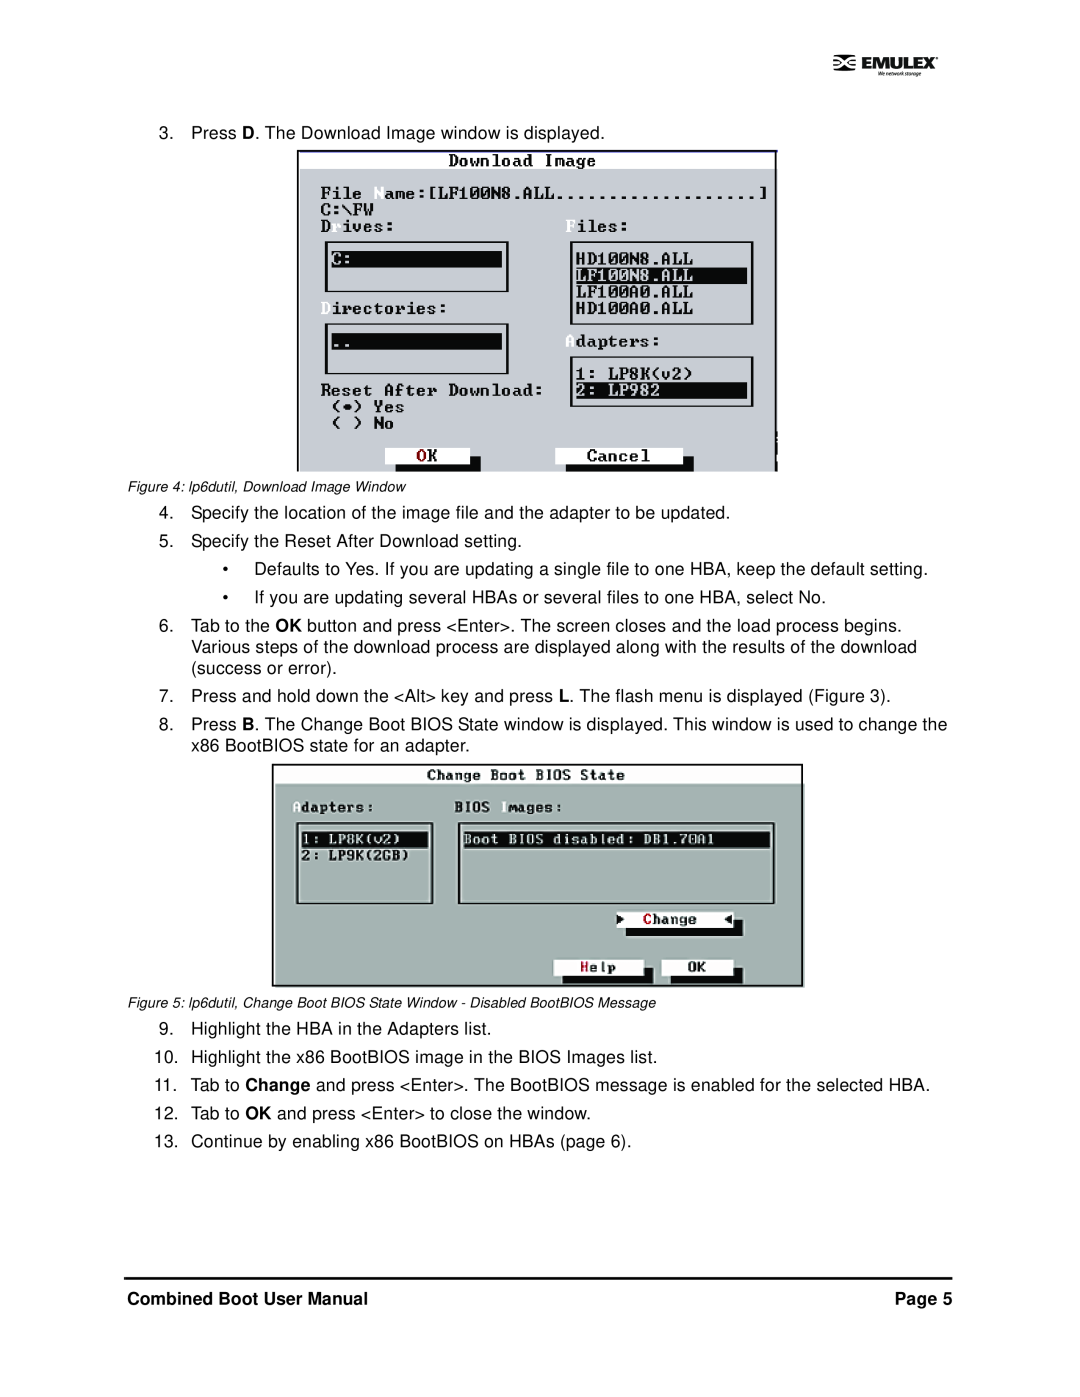 IBM 5.01 user manual Press D. The Download Image window is displayed, Page 